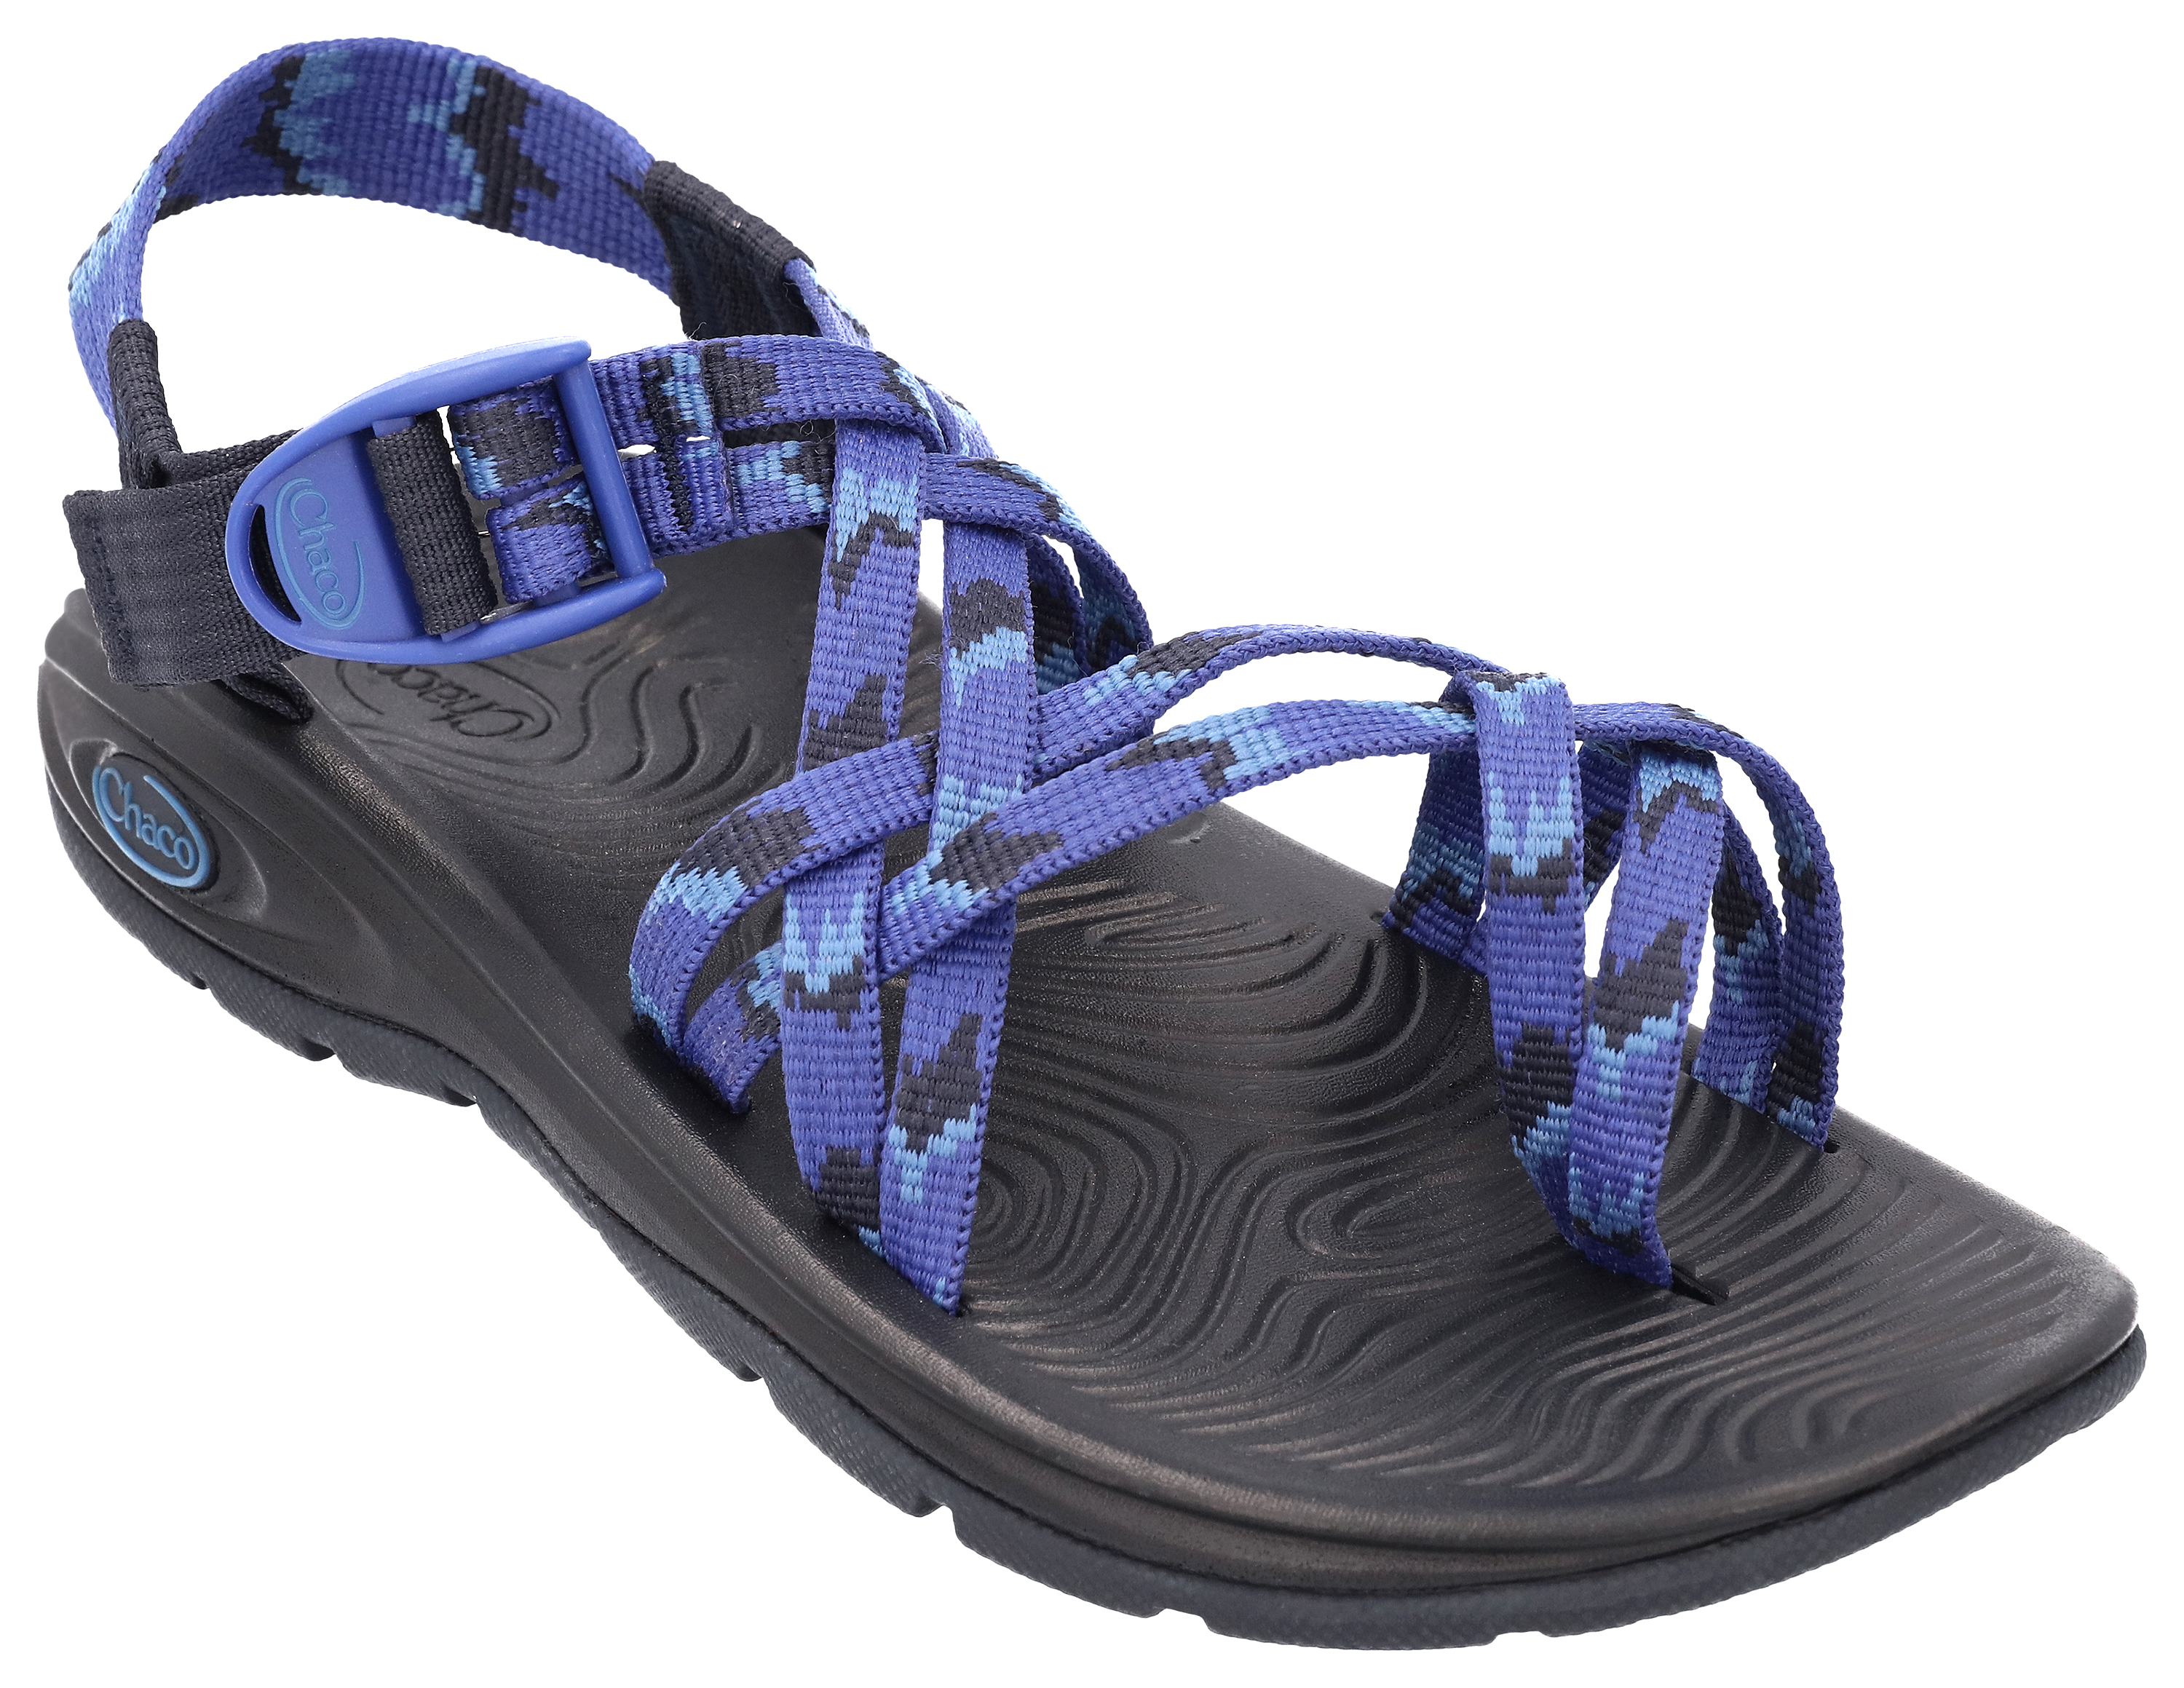 Chaco Z/Volv X2 Sandals for Ladies - Tinge Navy - 11M